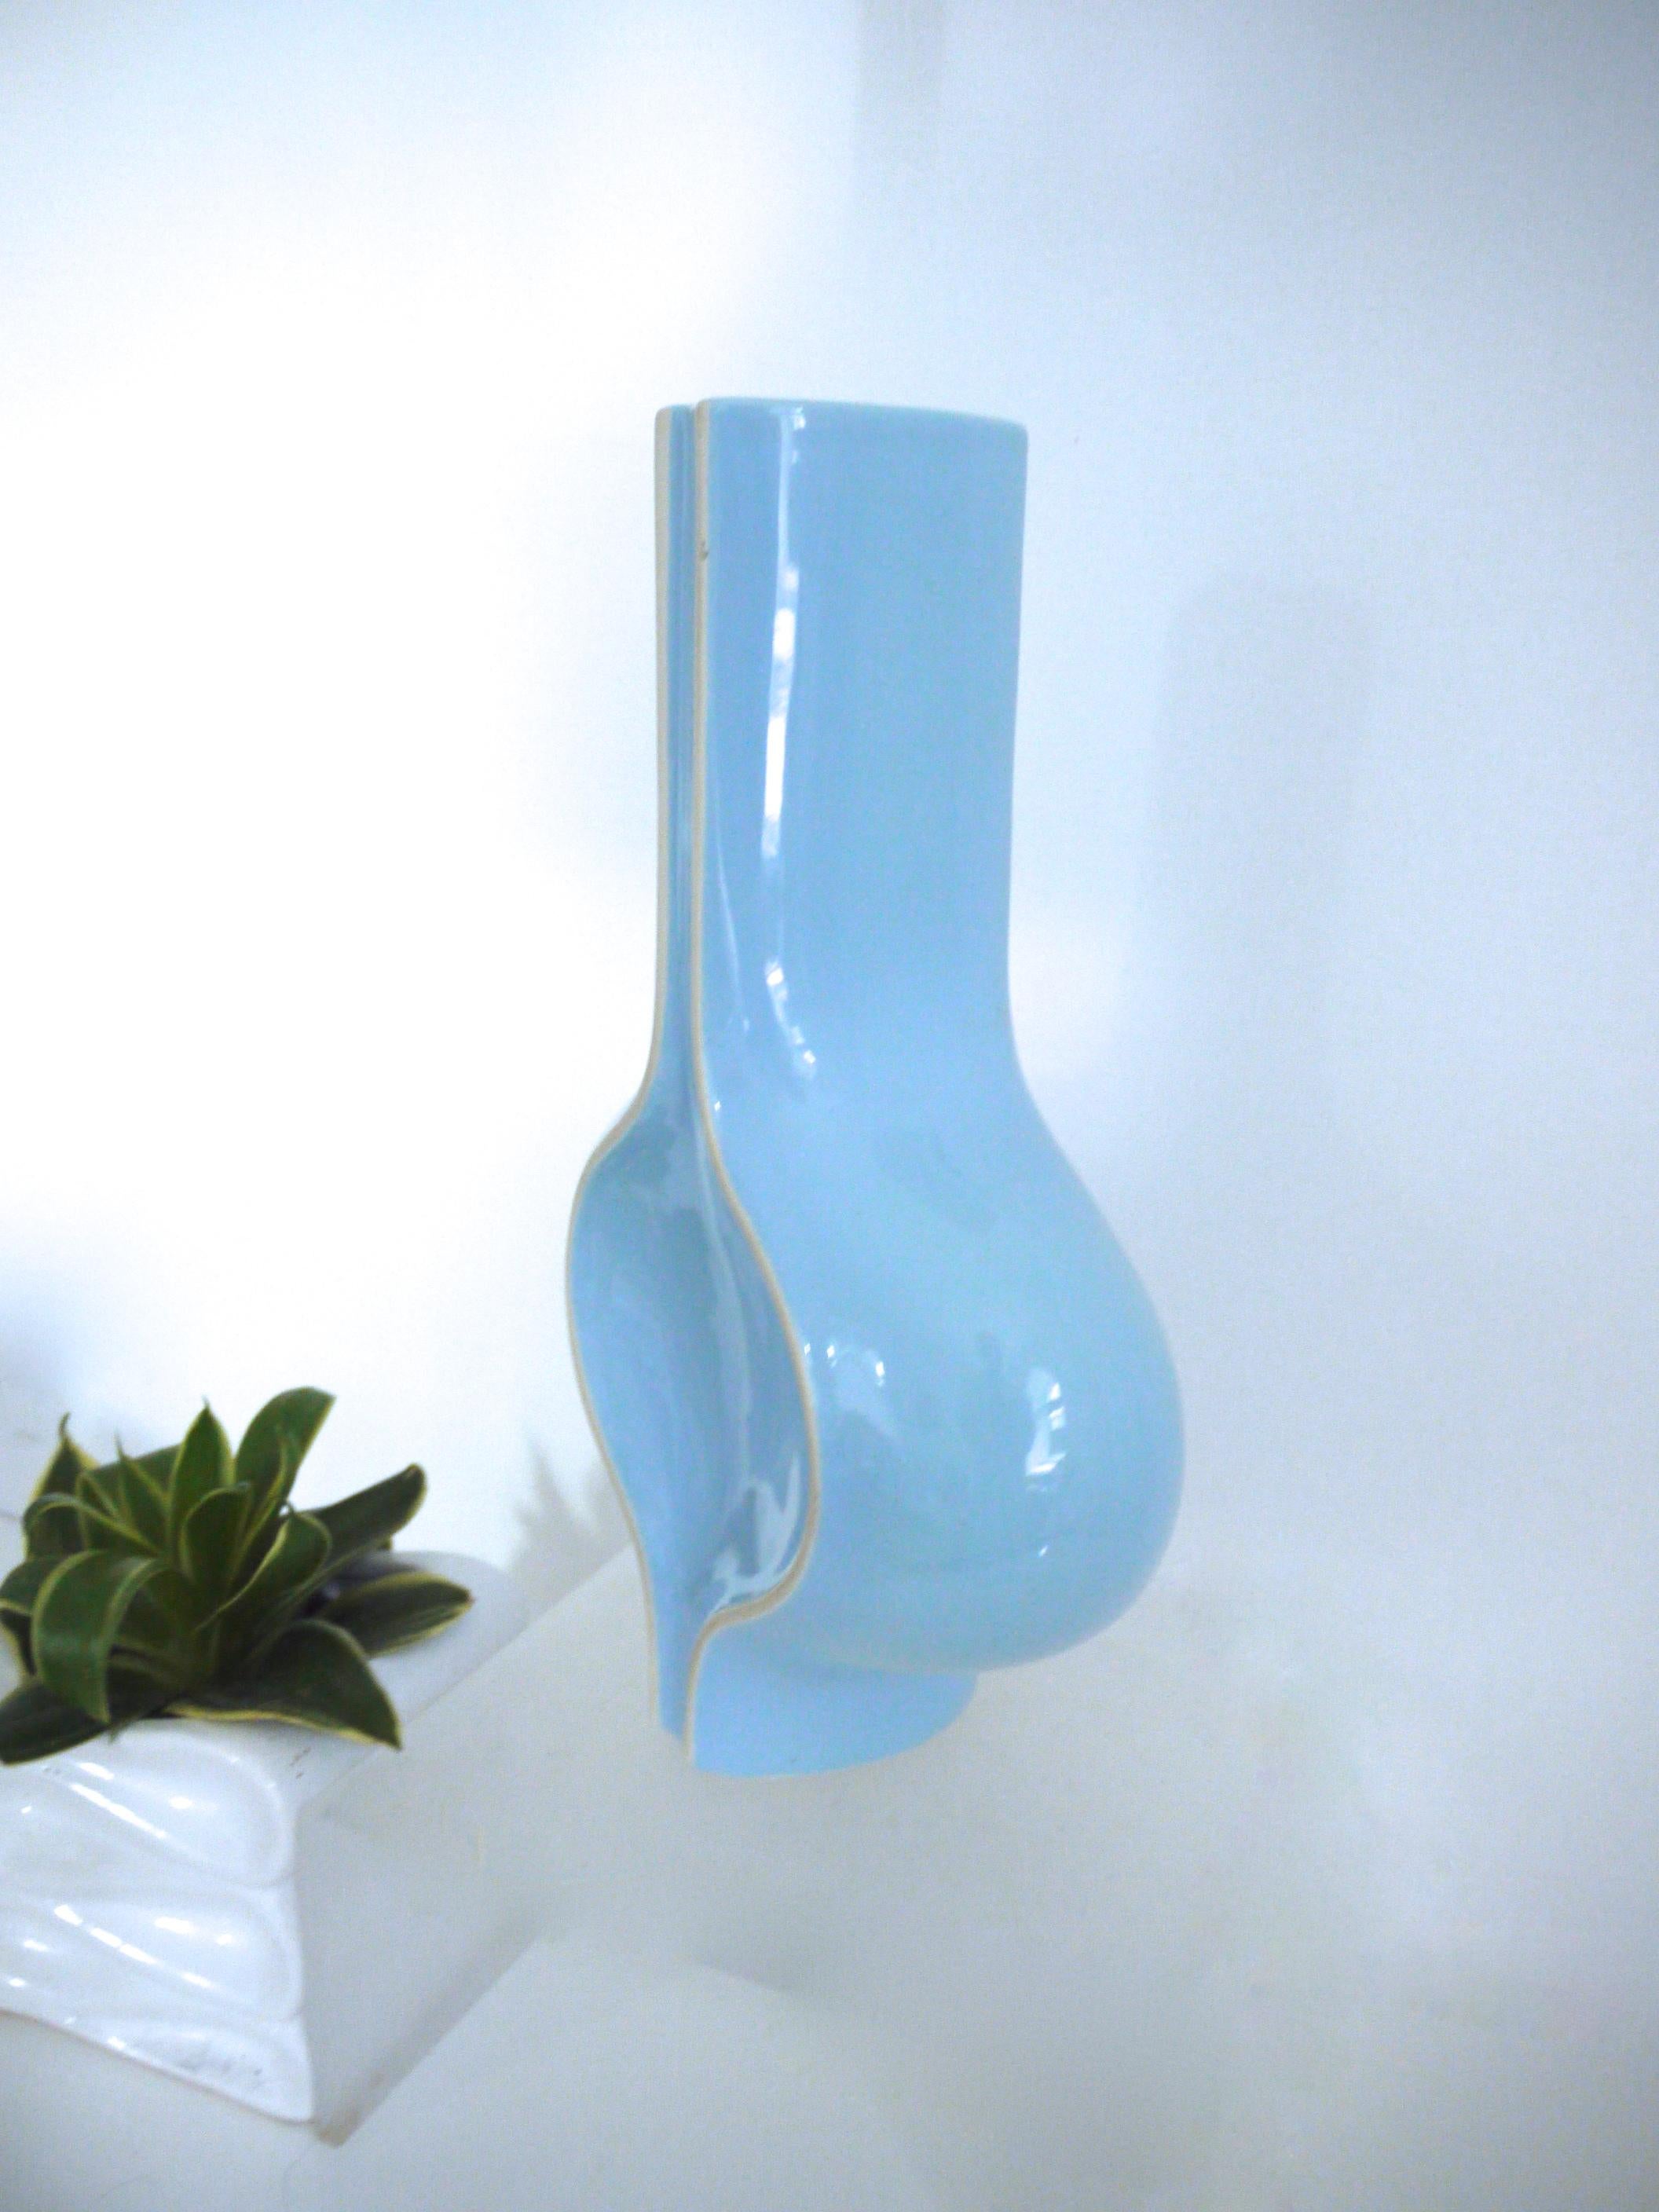 Contemporary Sought after, Space Age China Swallow Vase by Scabetti Dominic Bromley, 2002 UK For Sale